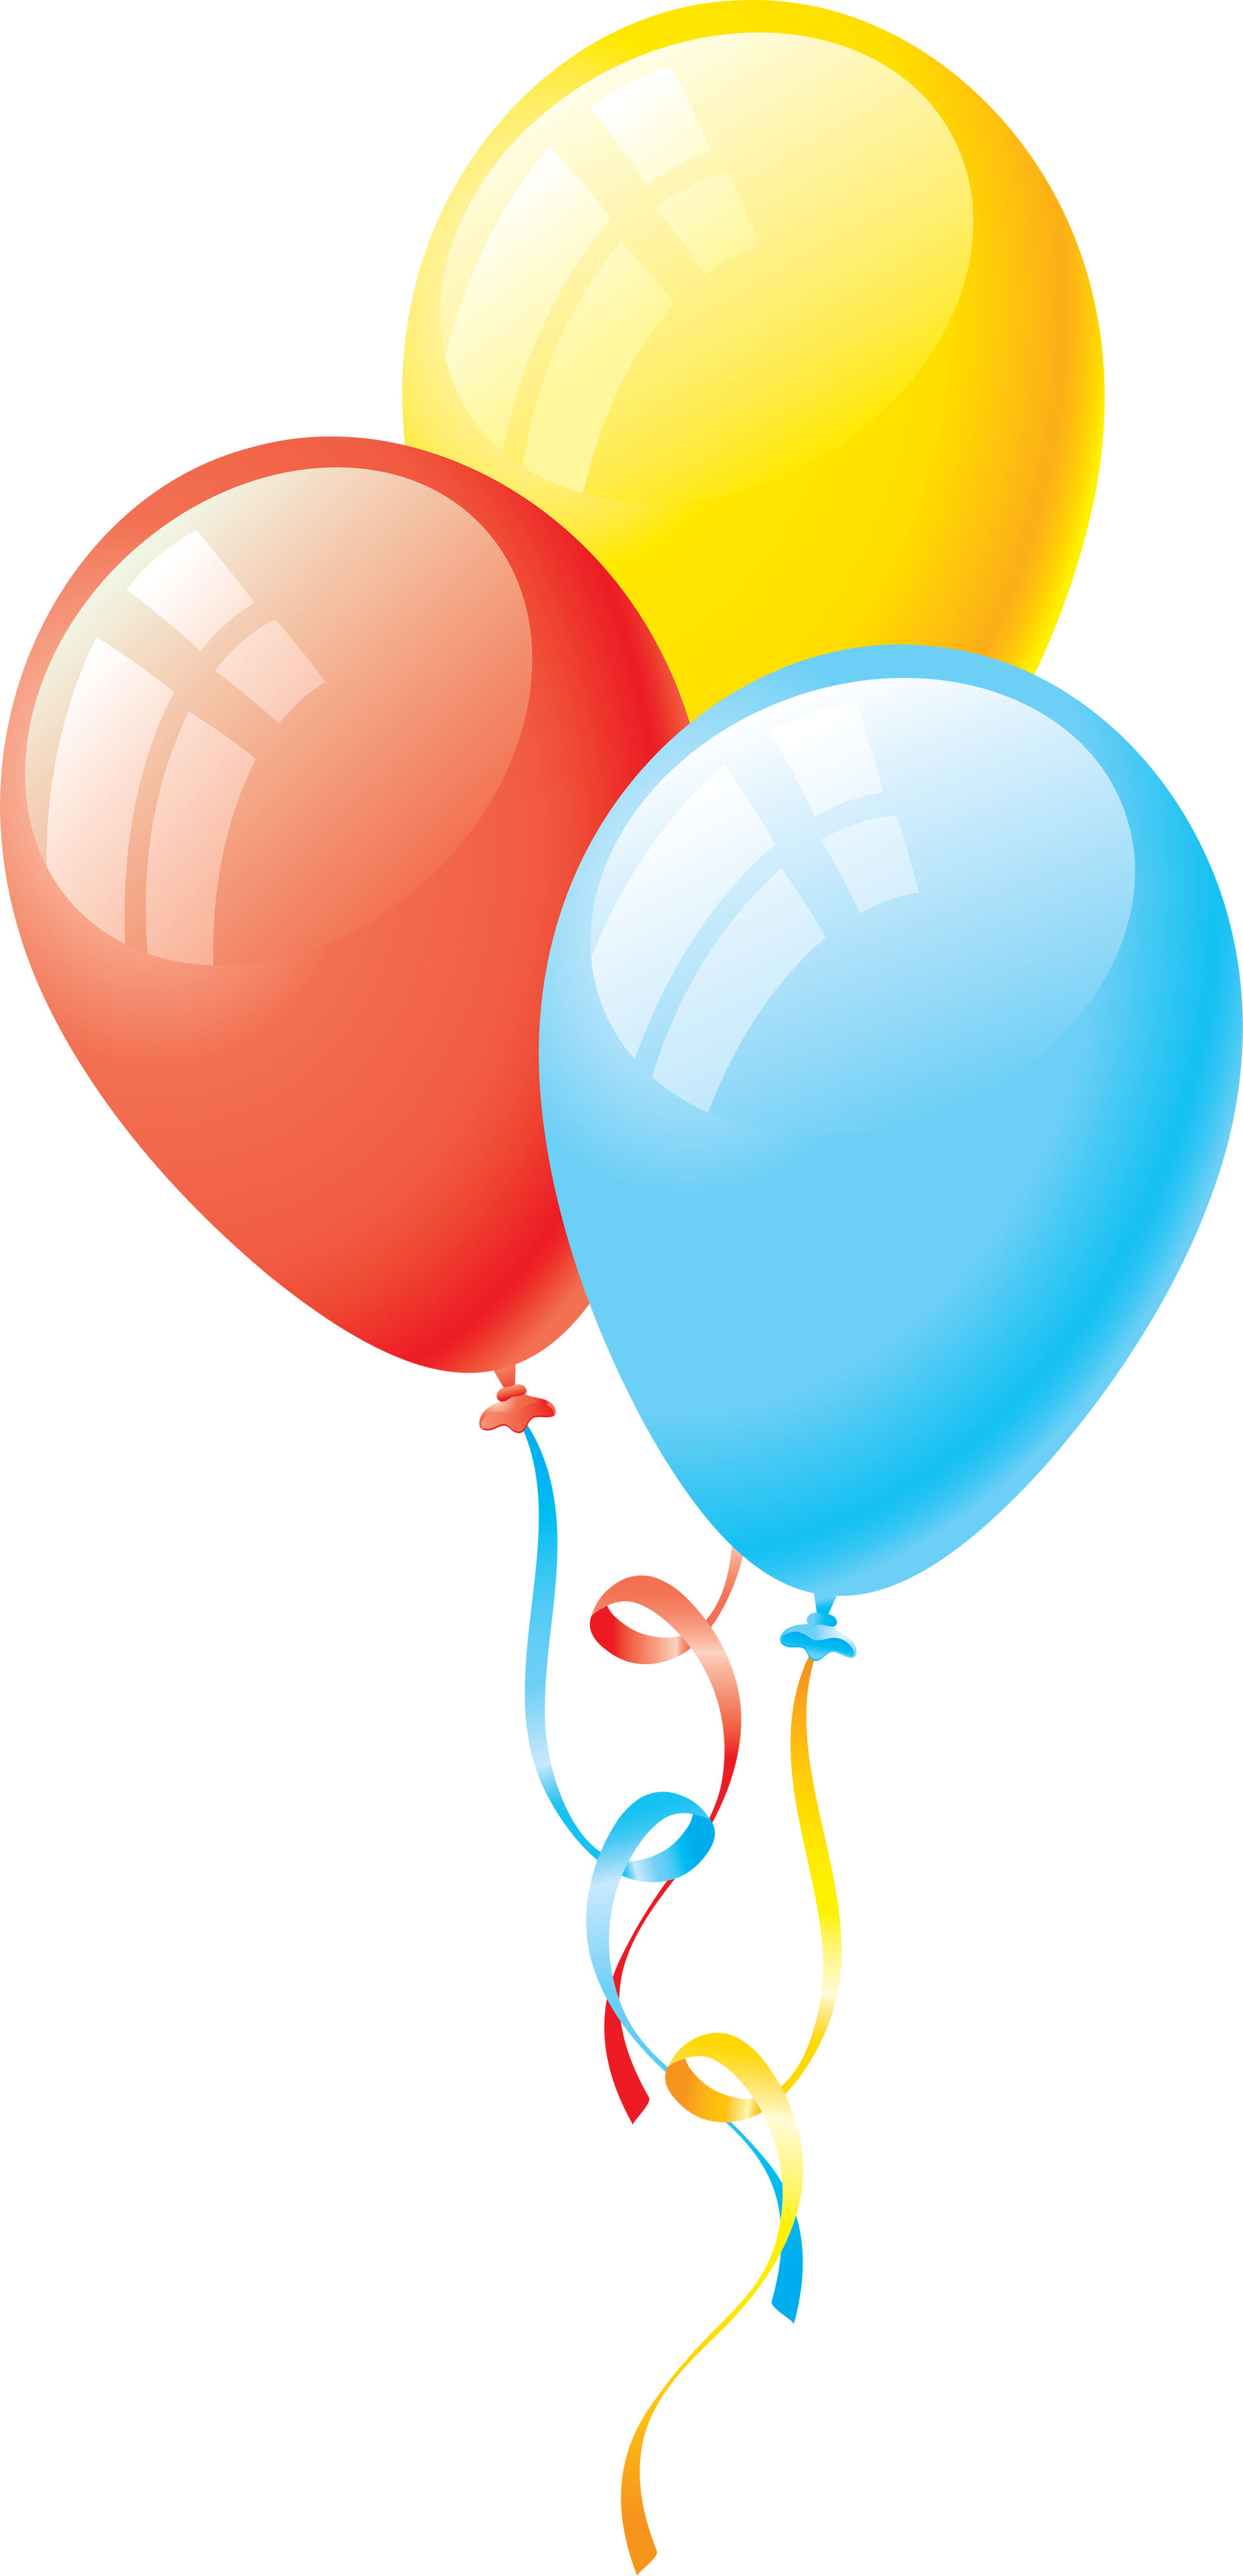 Balloon Png   Clipart Panda   Free Clipart Images